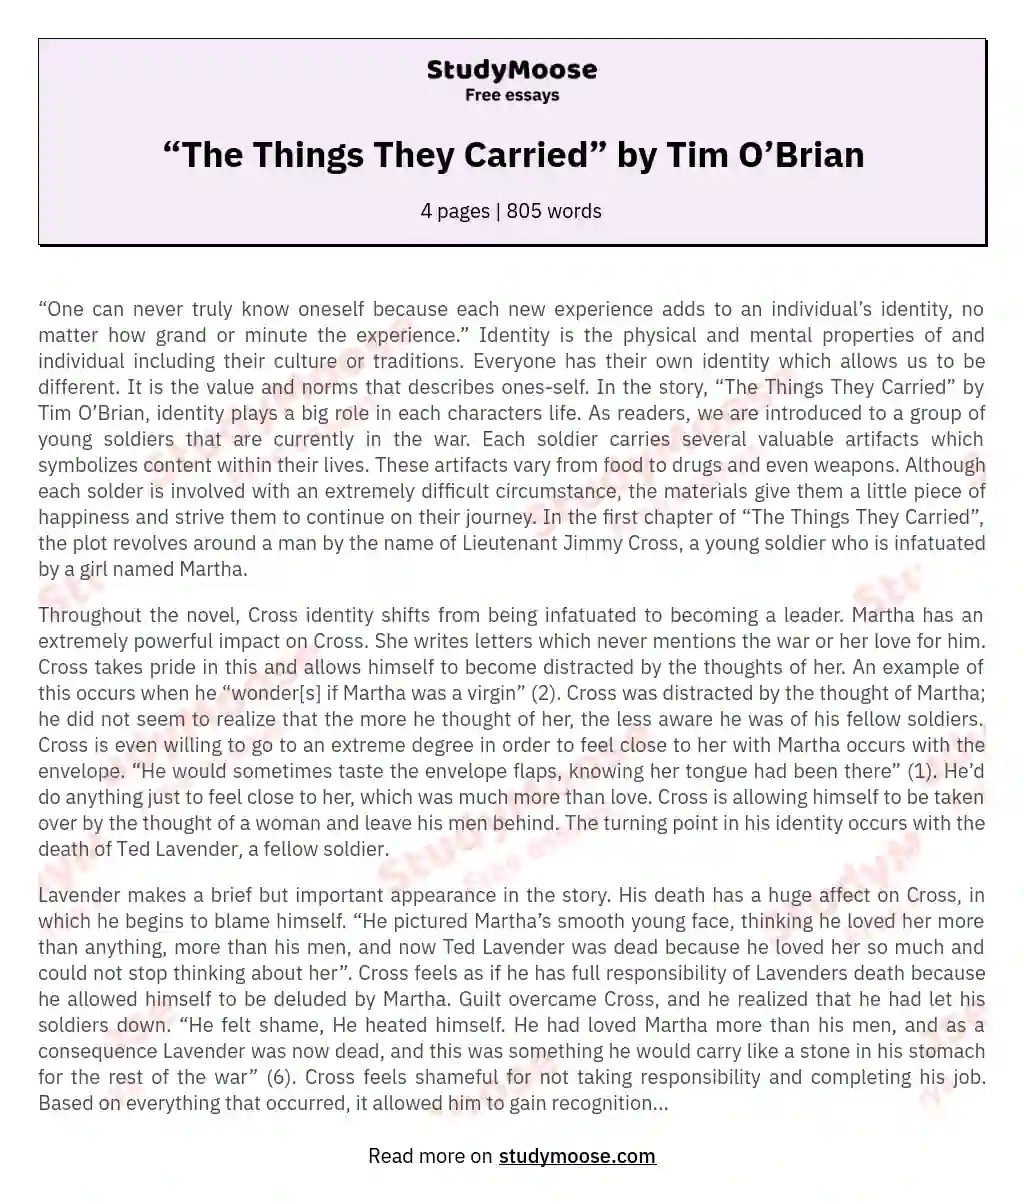 “The Things They Carried” by Tim O’Brian